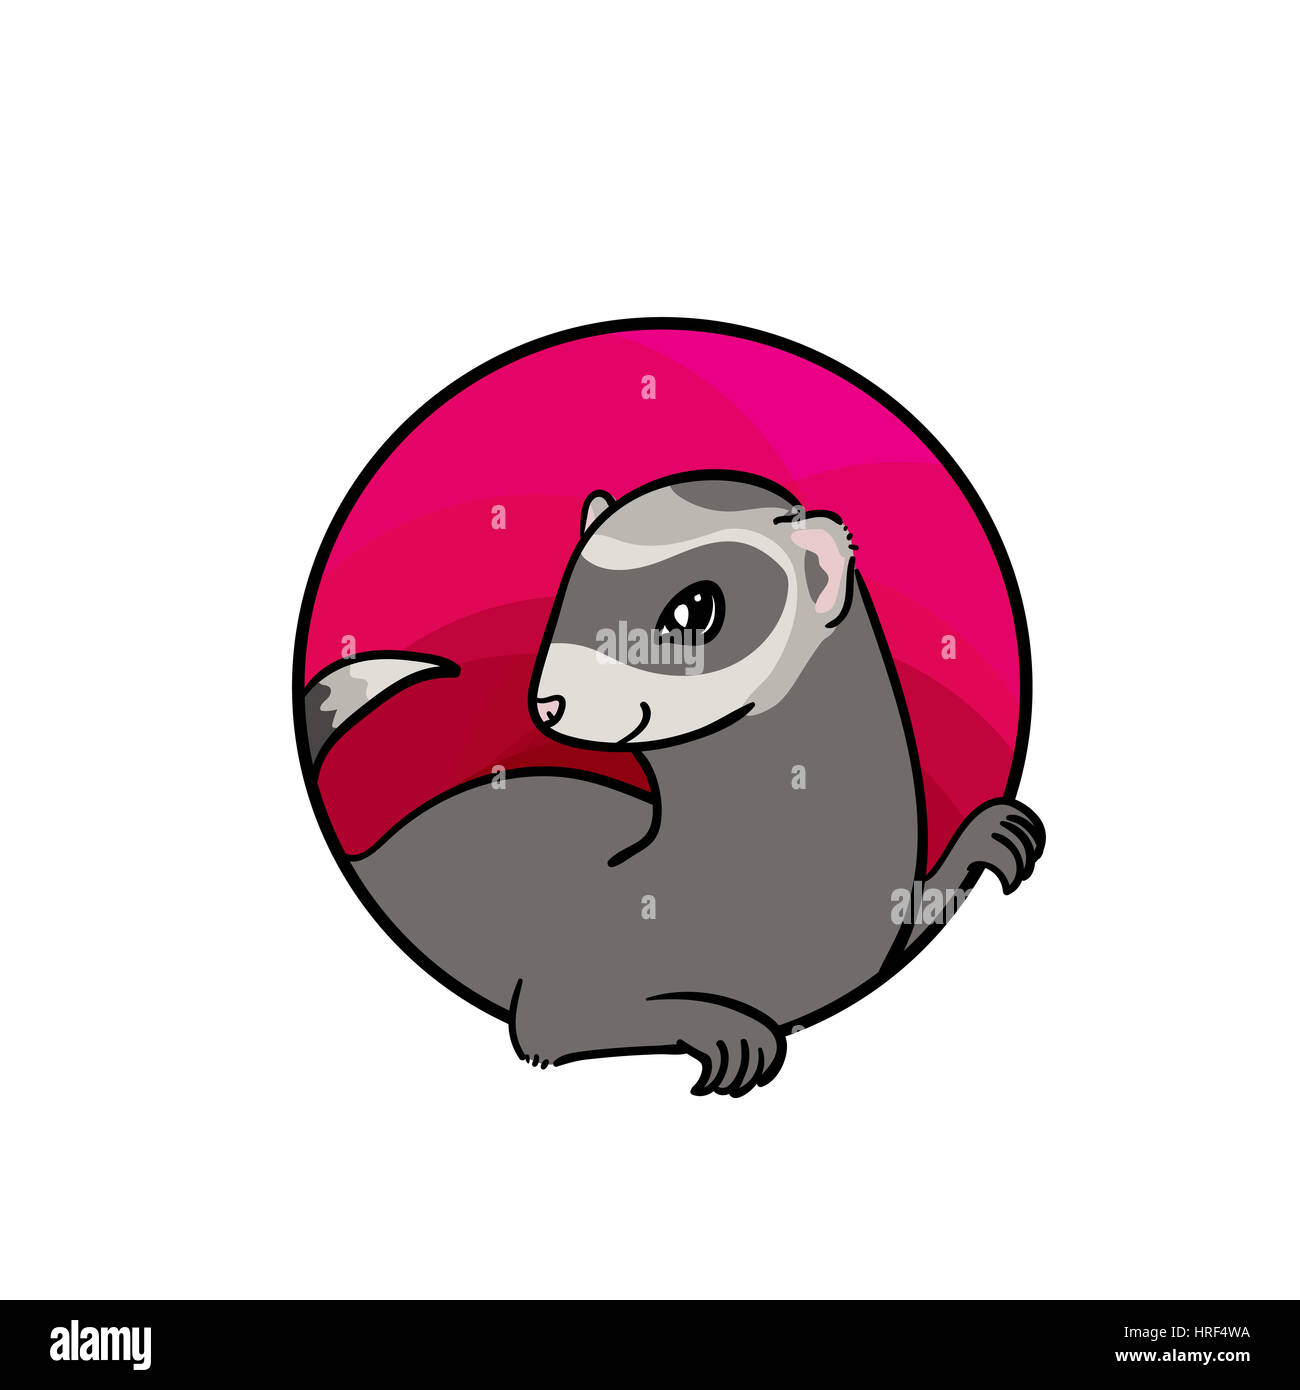 Ferret. Animal art, cute cartoon style, hand drawn illustration. Suitable for pet shop or zoo ads, label design or animal food package element Stock Photo